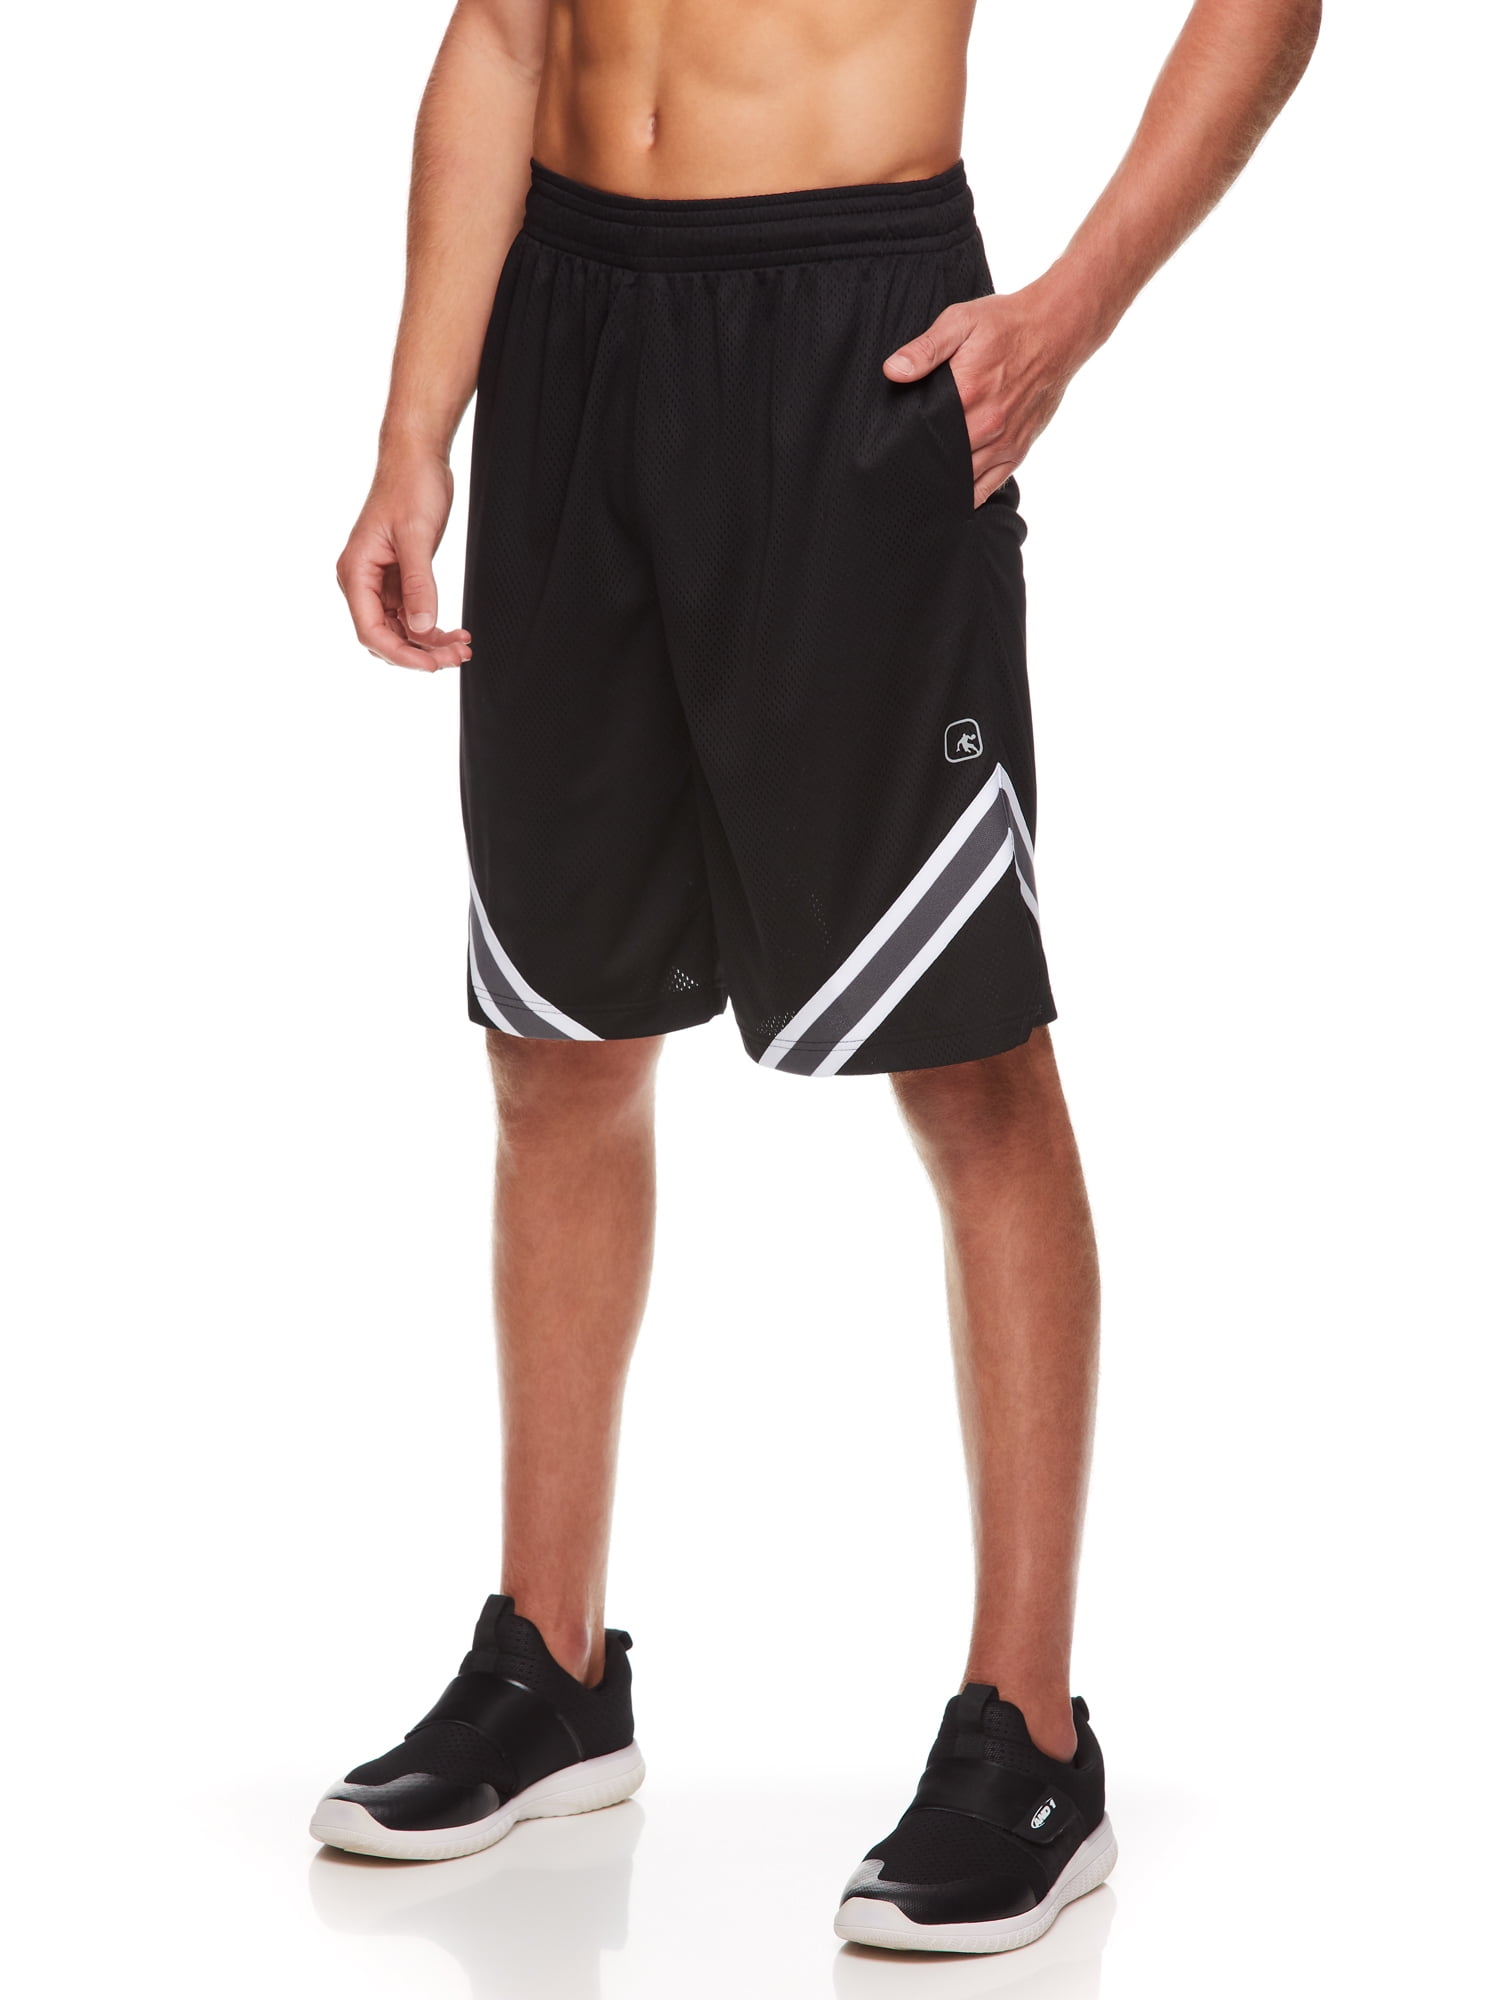 **** New Mens Basketball Shorts by And1.**Adjustable Elastic Waist Size 3XL.**** 